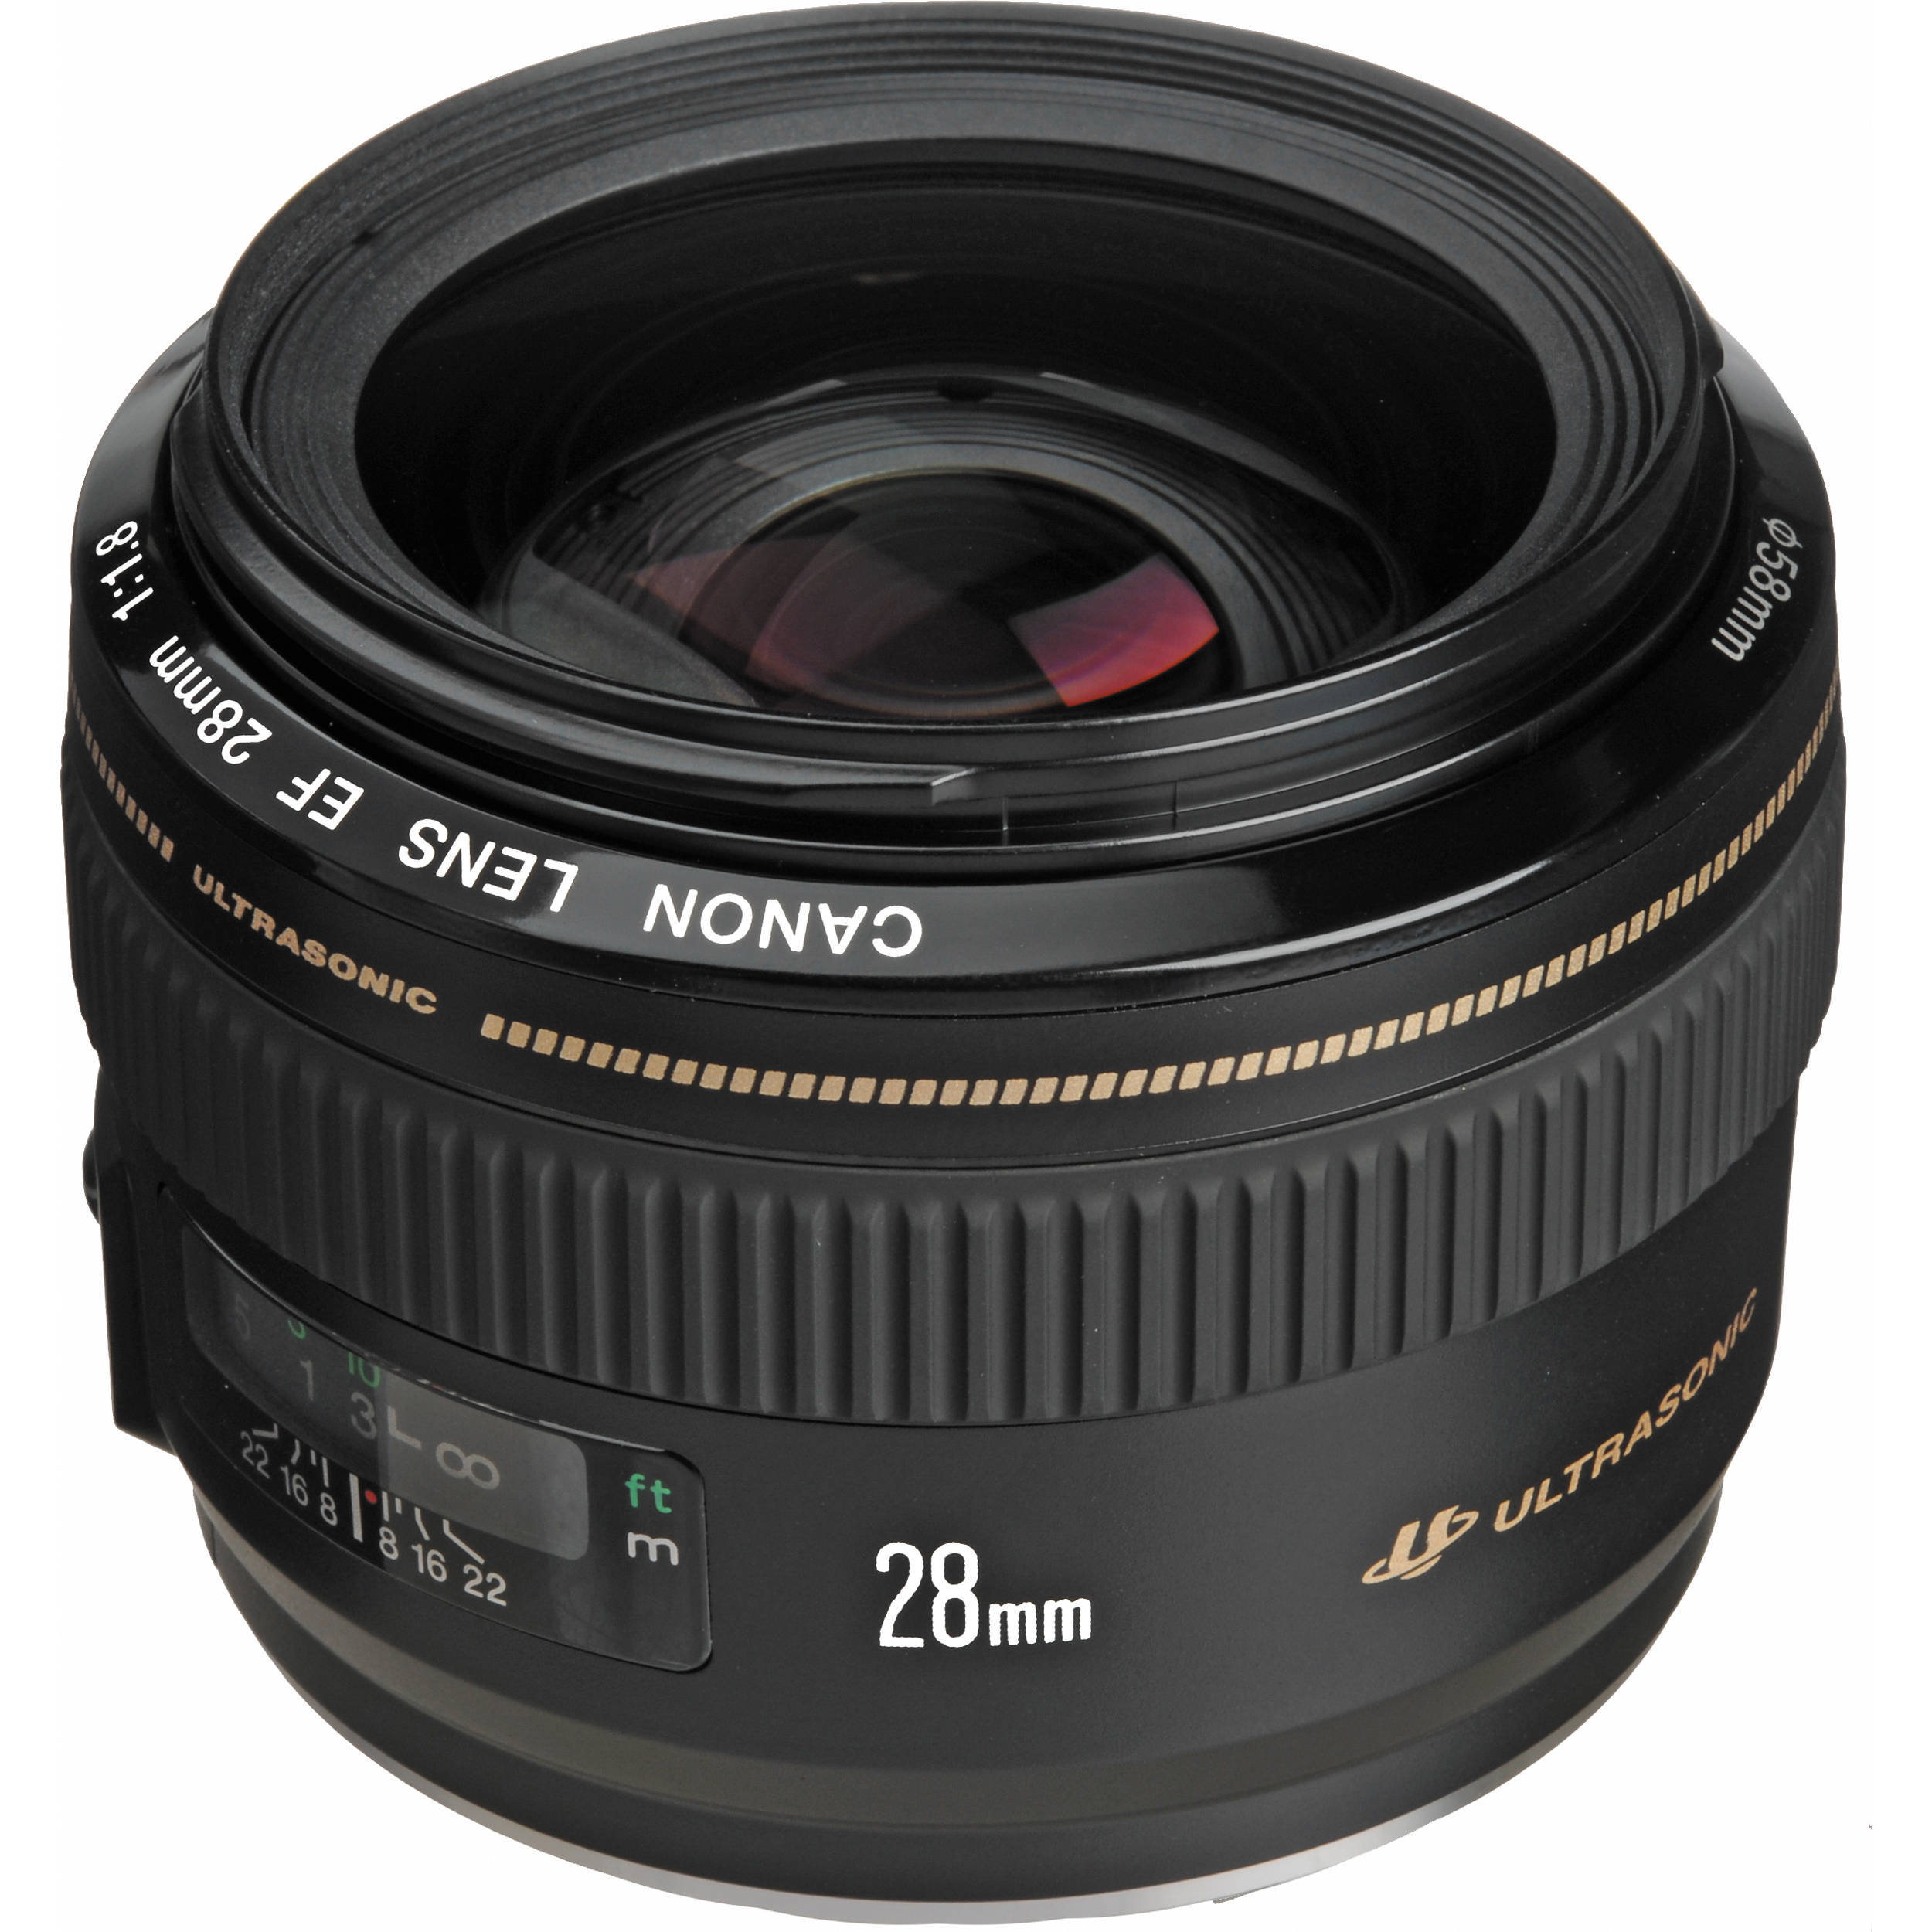 canon ef 28mm f1 8 usm review